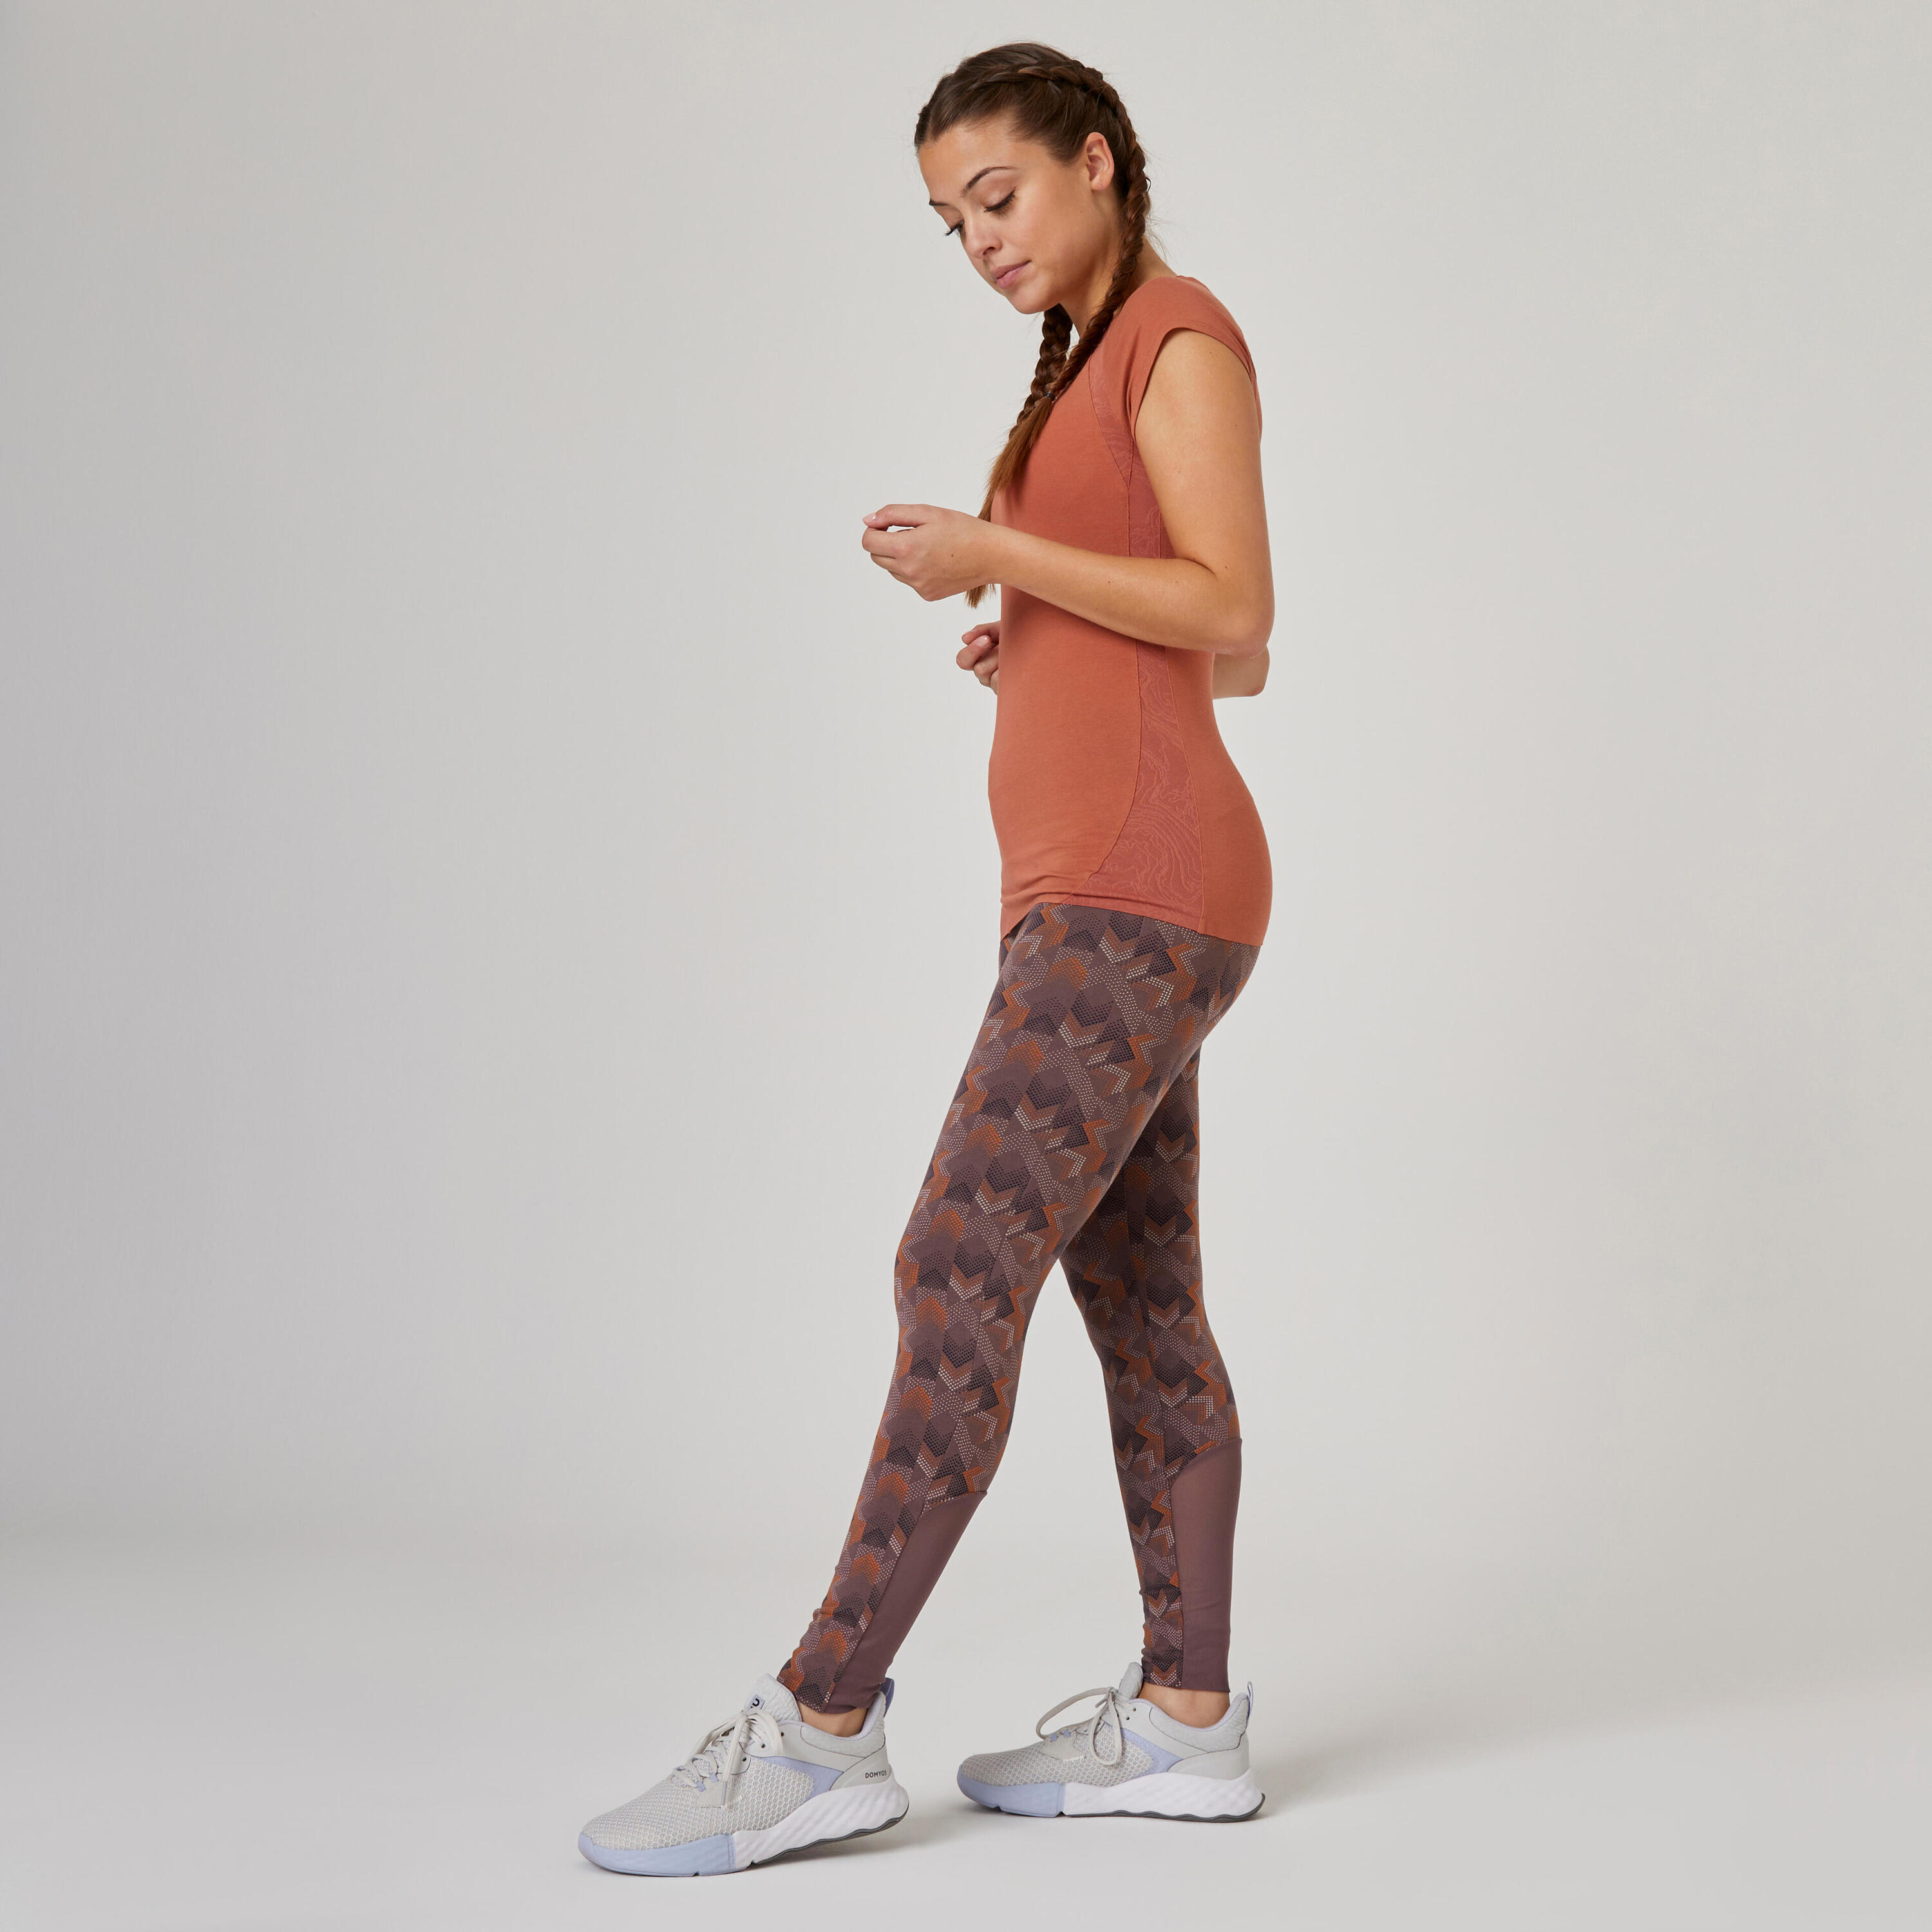 Stretchy High-Waisted Cotton Fitness Leggings with Mesh - Brown Print 3/7